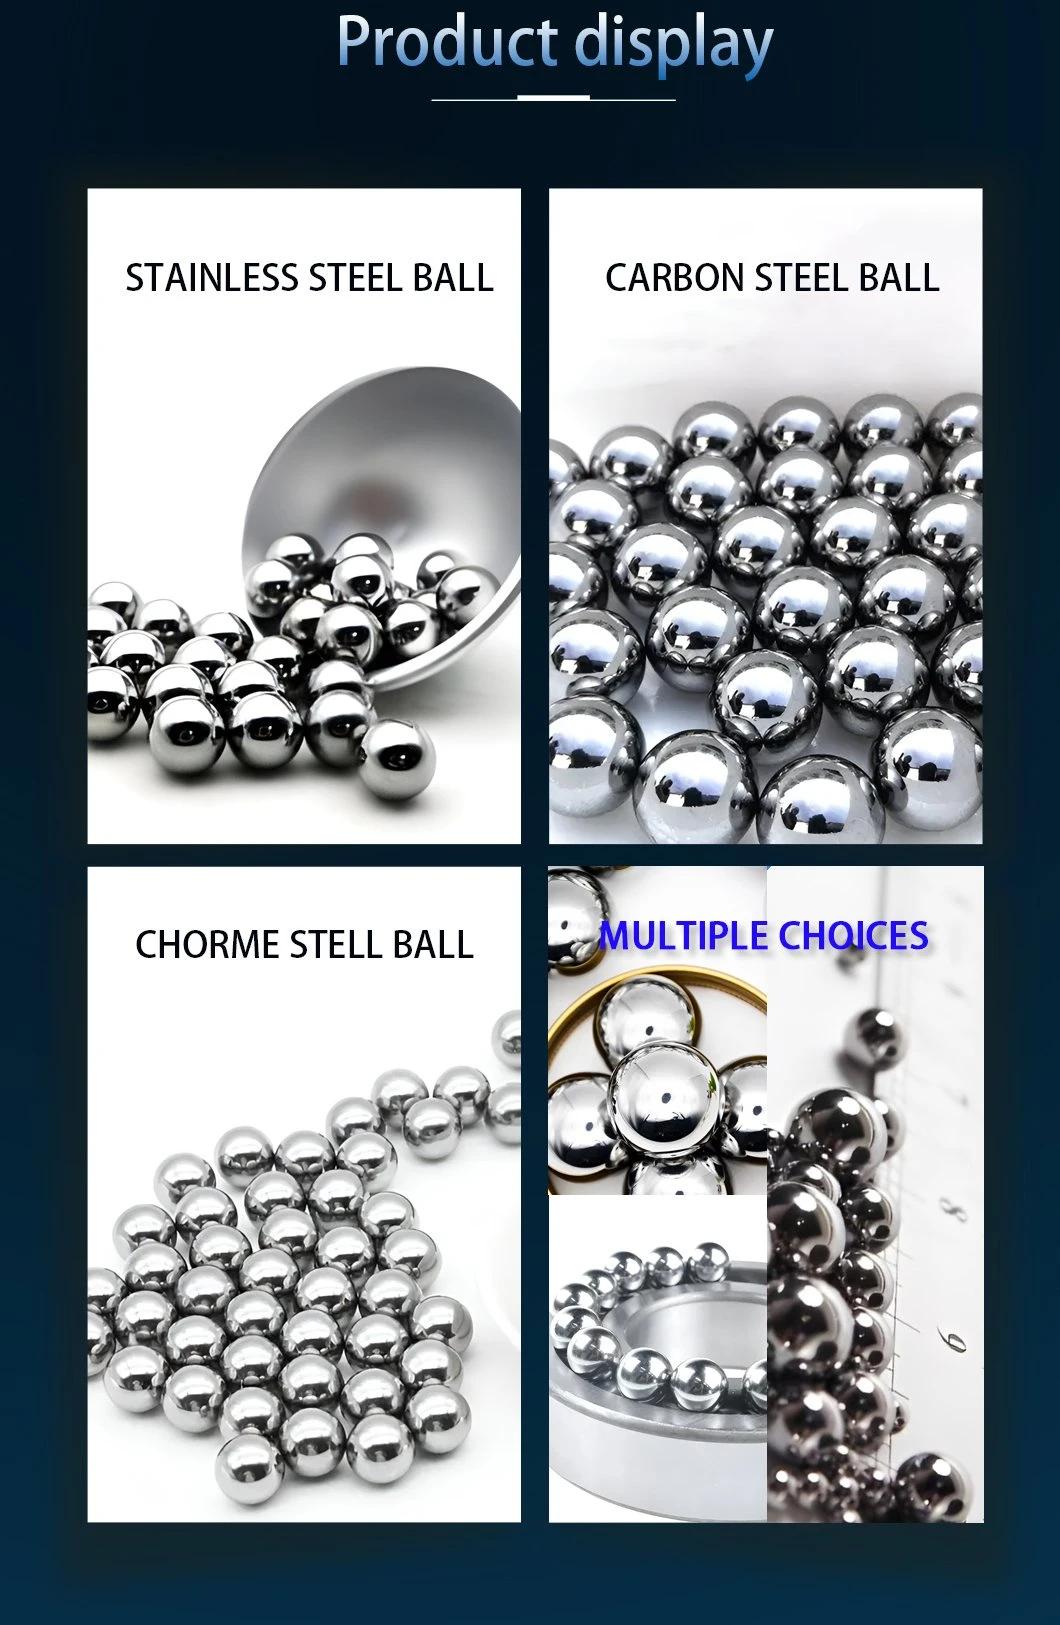 Chrome Steel Balls 1.0-50mm G3-G500 for Ball Bearing/Auto/Motorcycle/Bicycle Parts/Guide Rail"